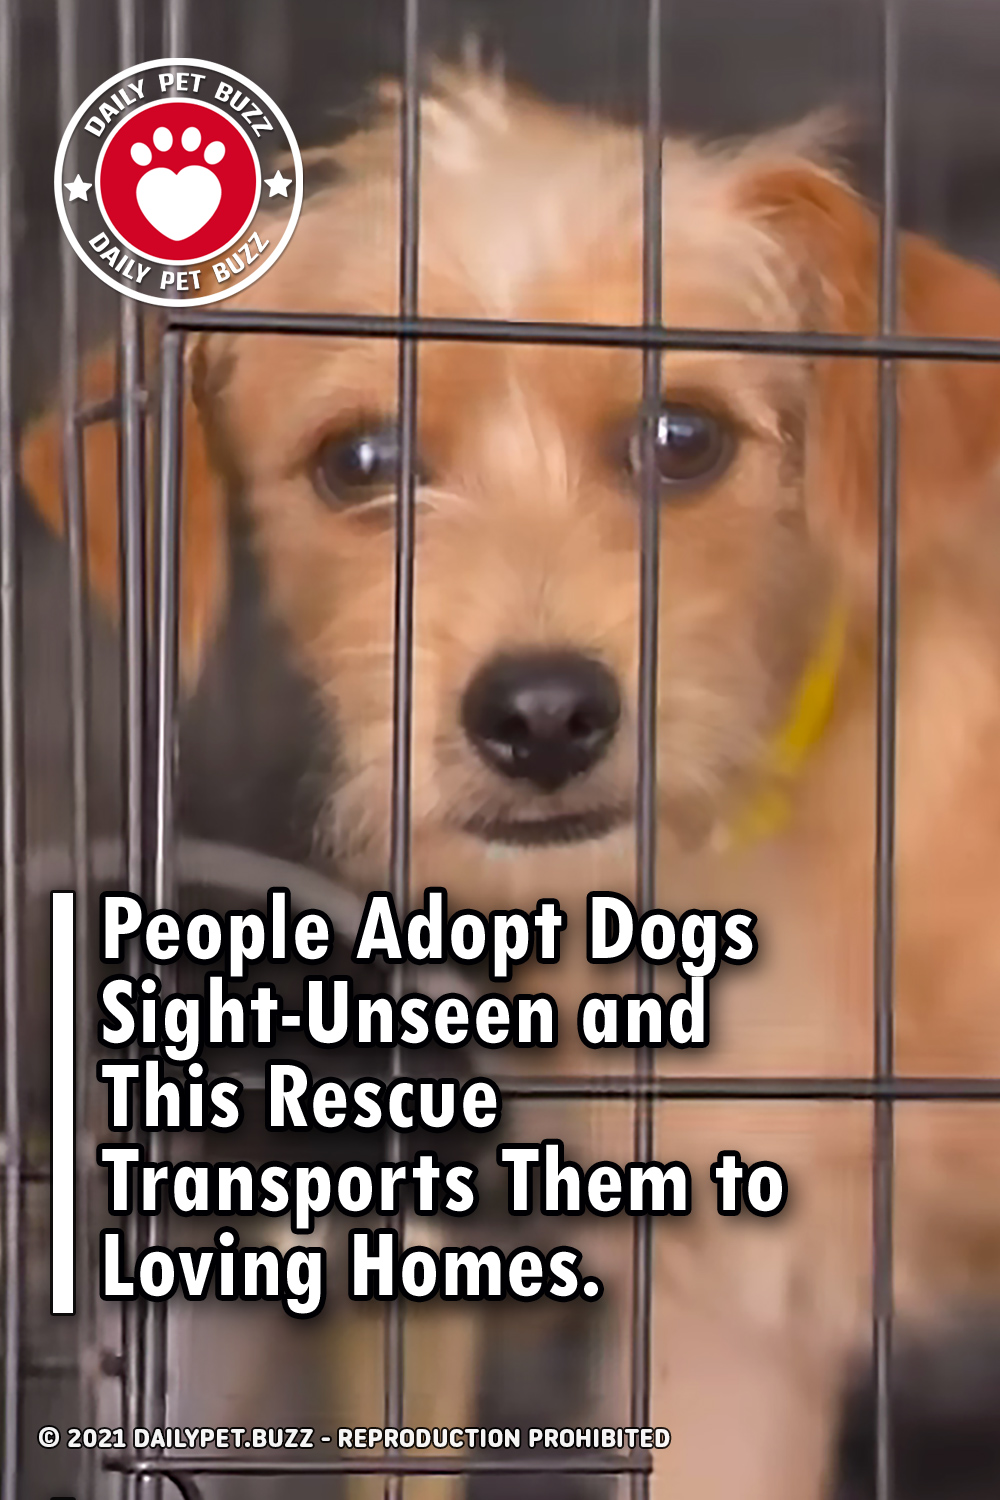 People Adopt Dogs Sight-Unseen and This Rescue Transports Them to Loving Homes.